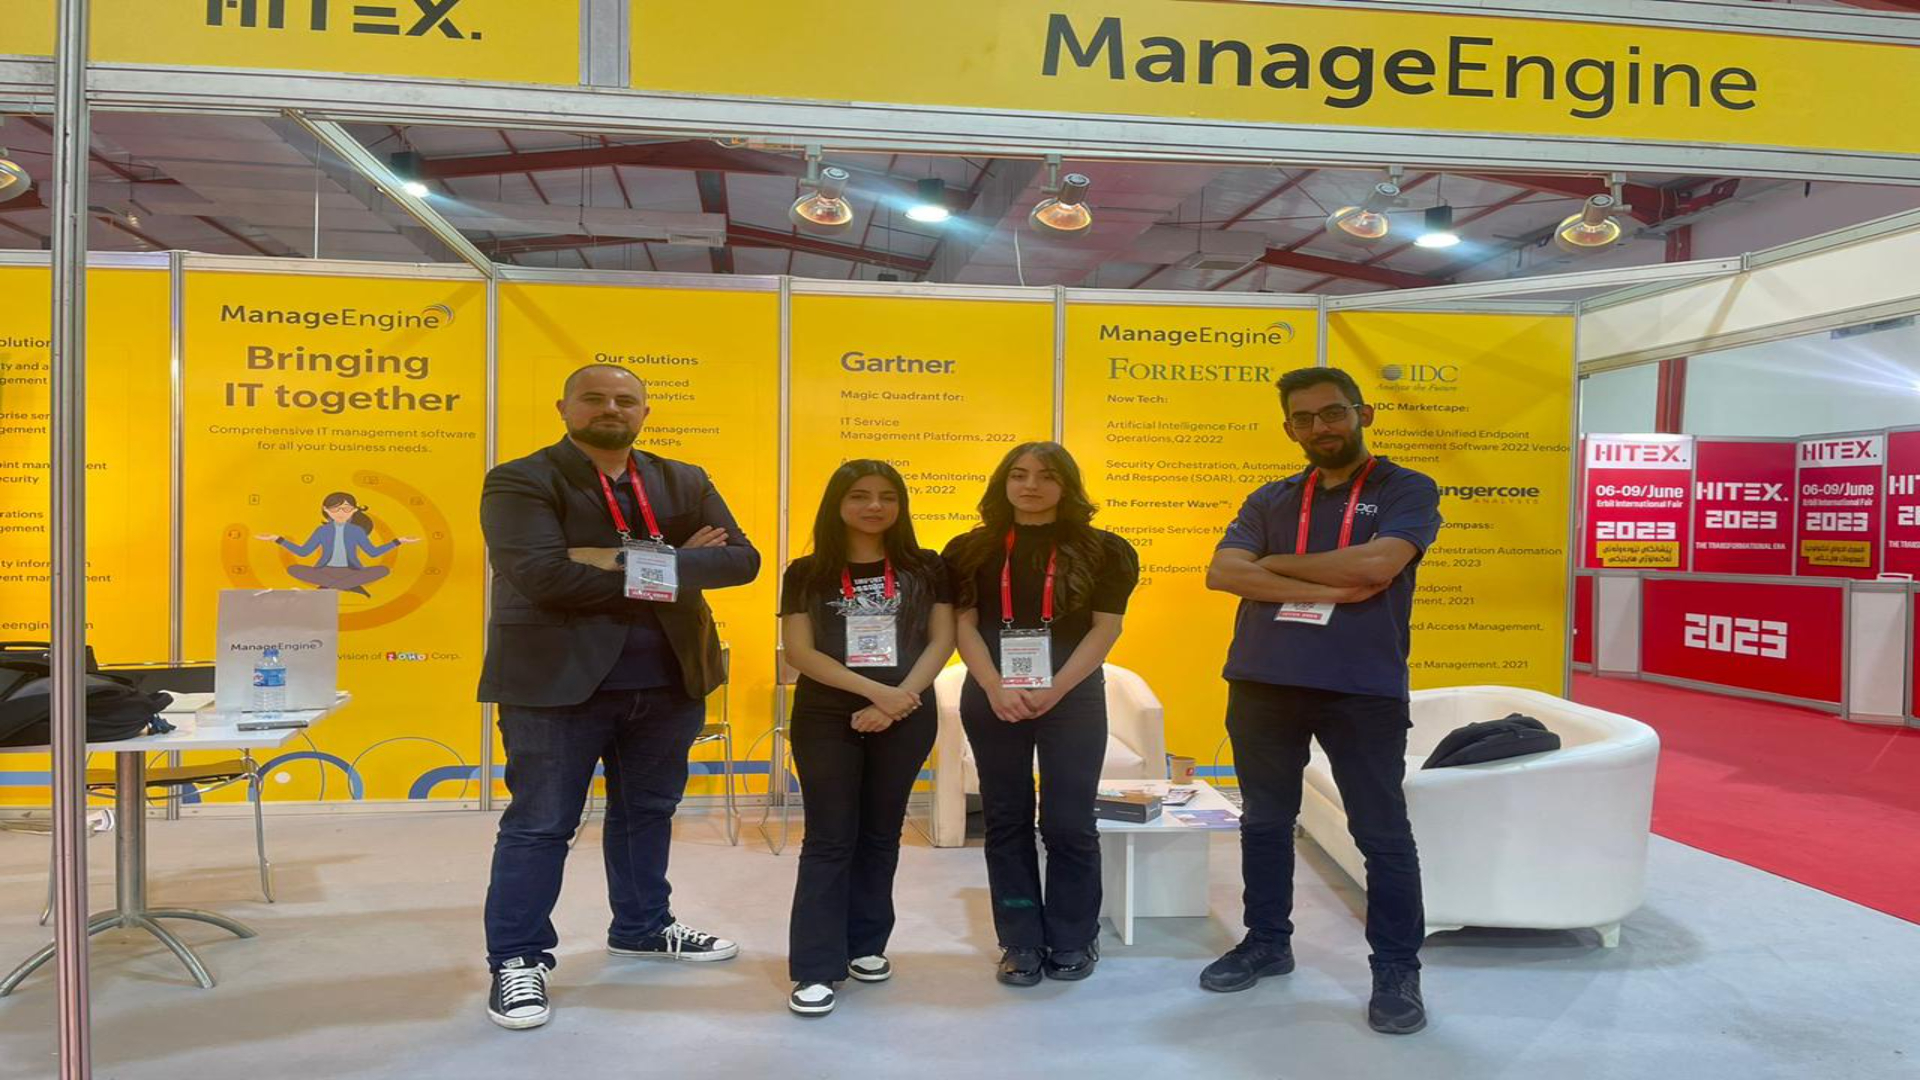 TjDeeD and ManageEngine Partnered at HITEX2023 Showcasing Innovative Solutions for Digital Transformation